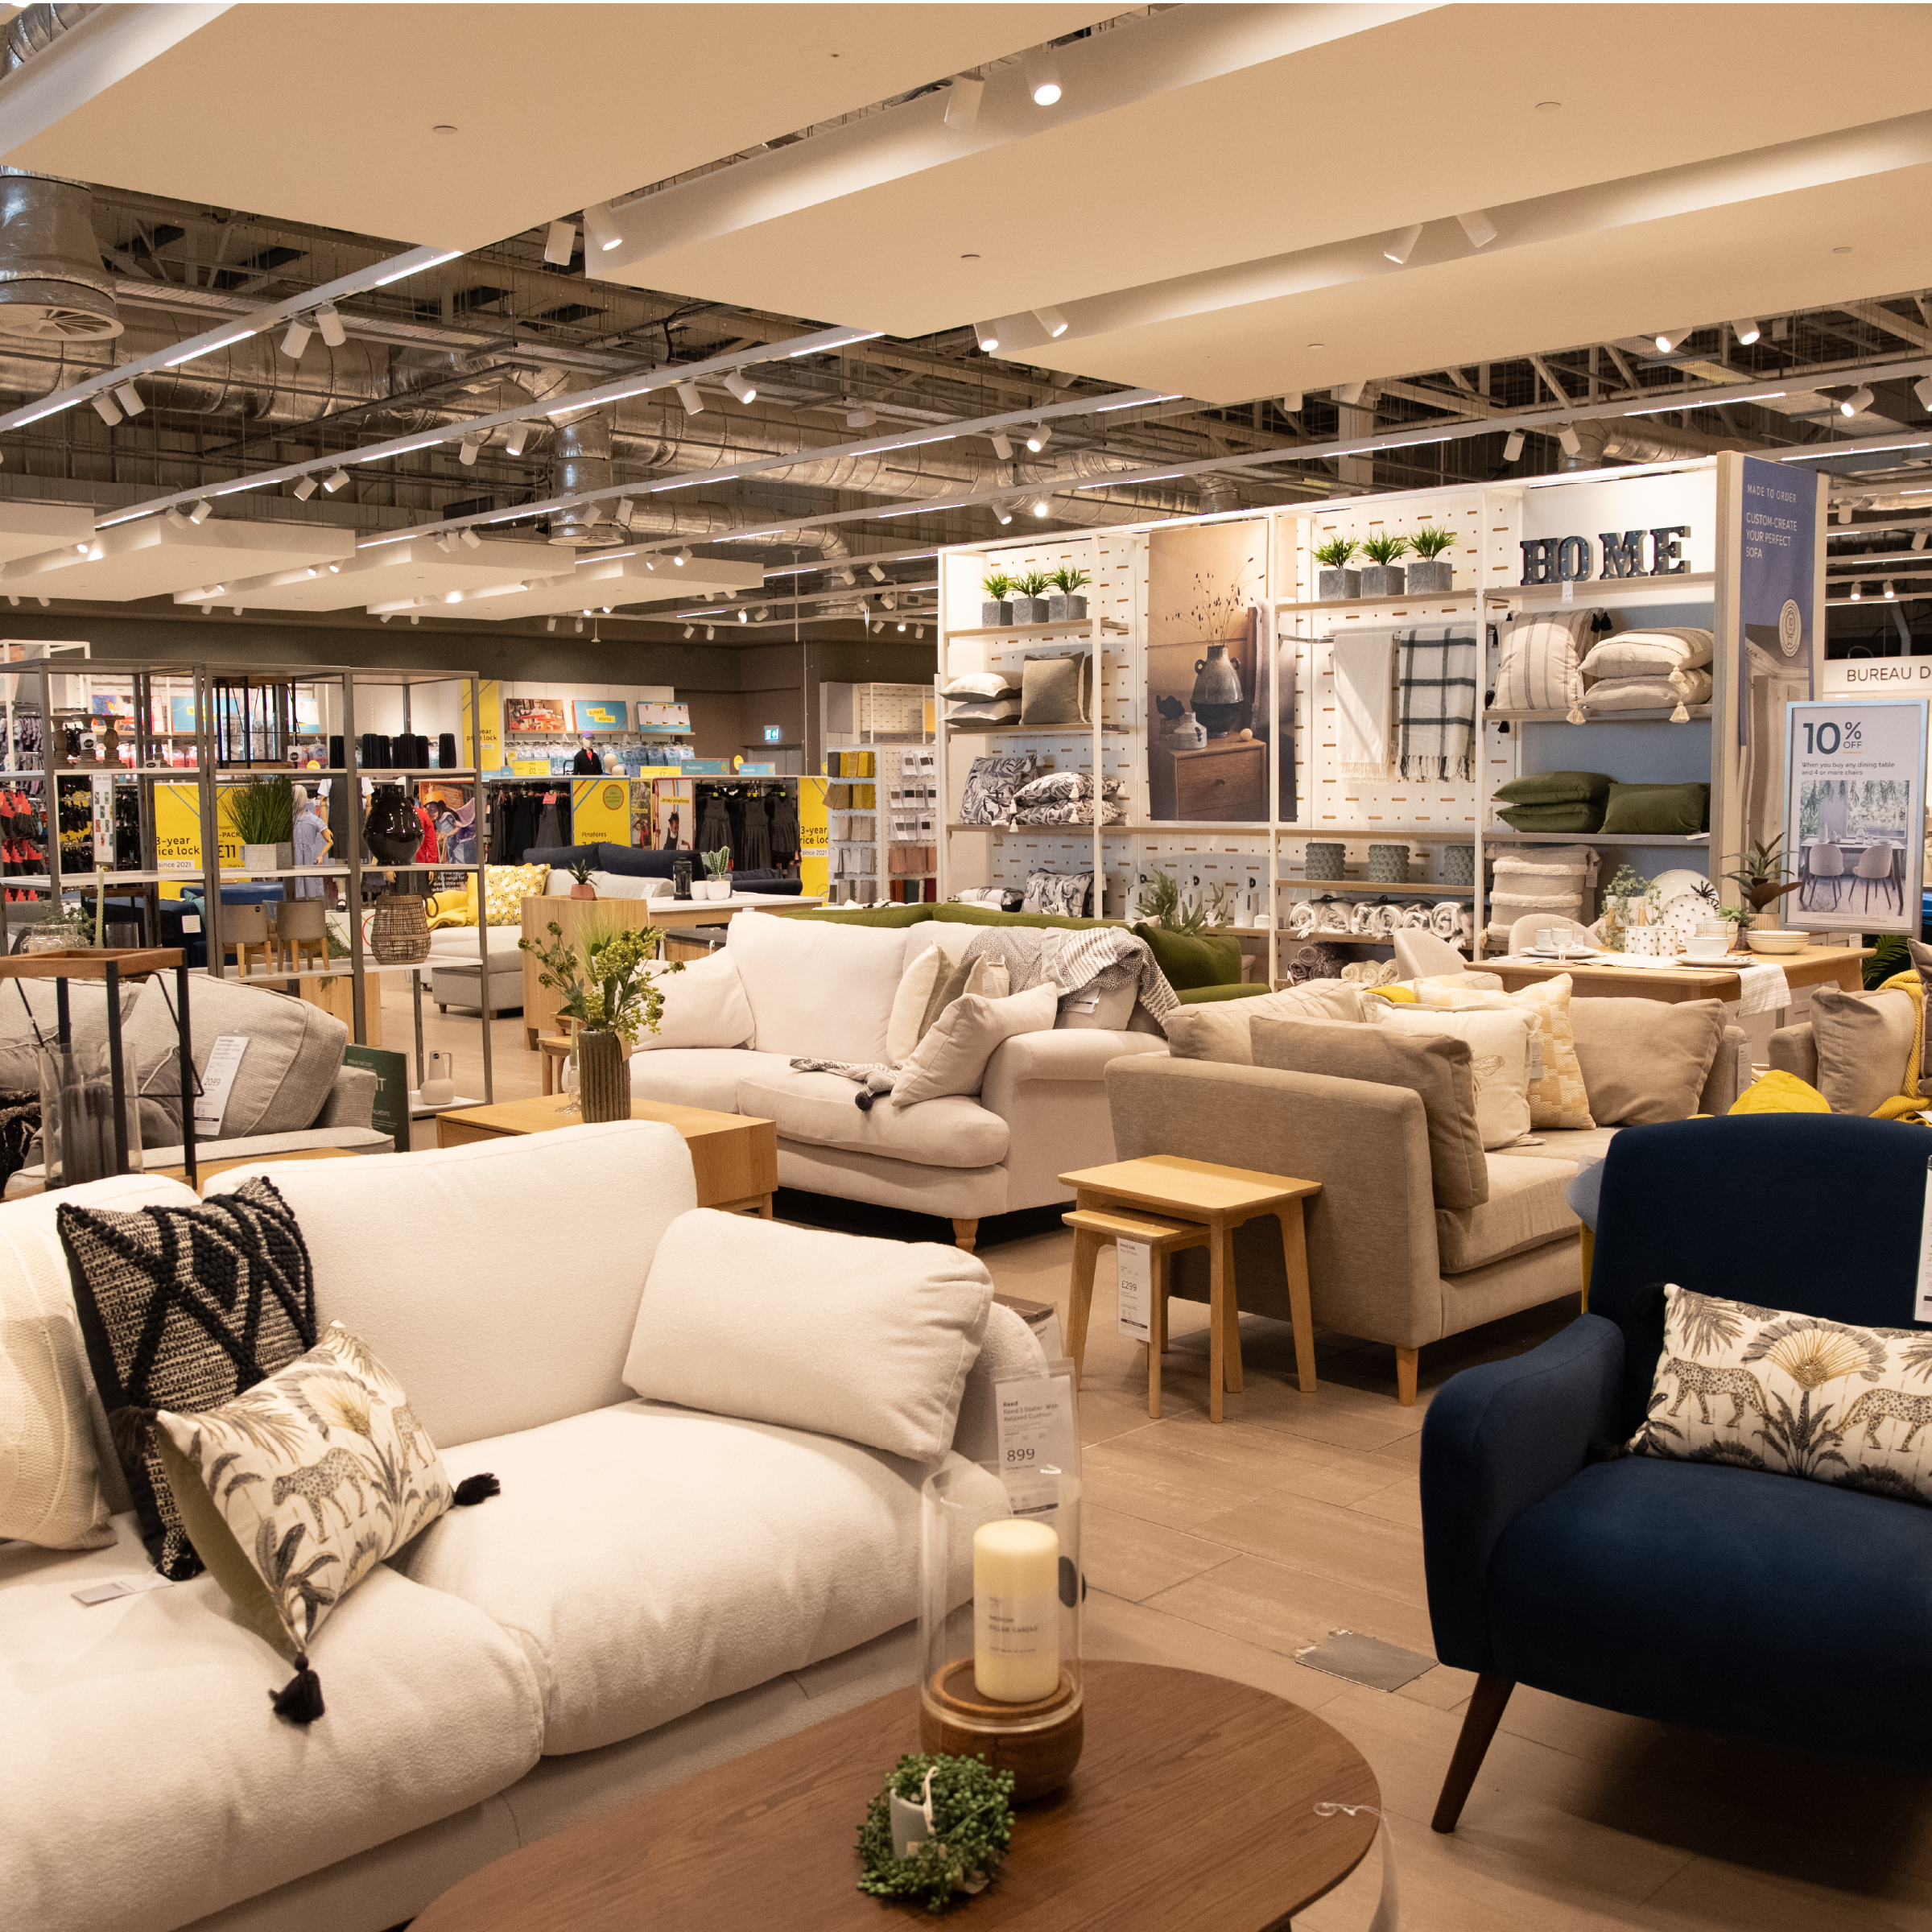 M&S Home at Spruceifled Centre